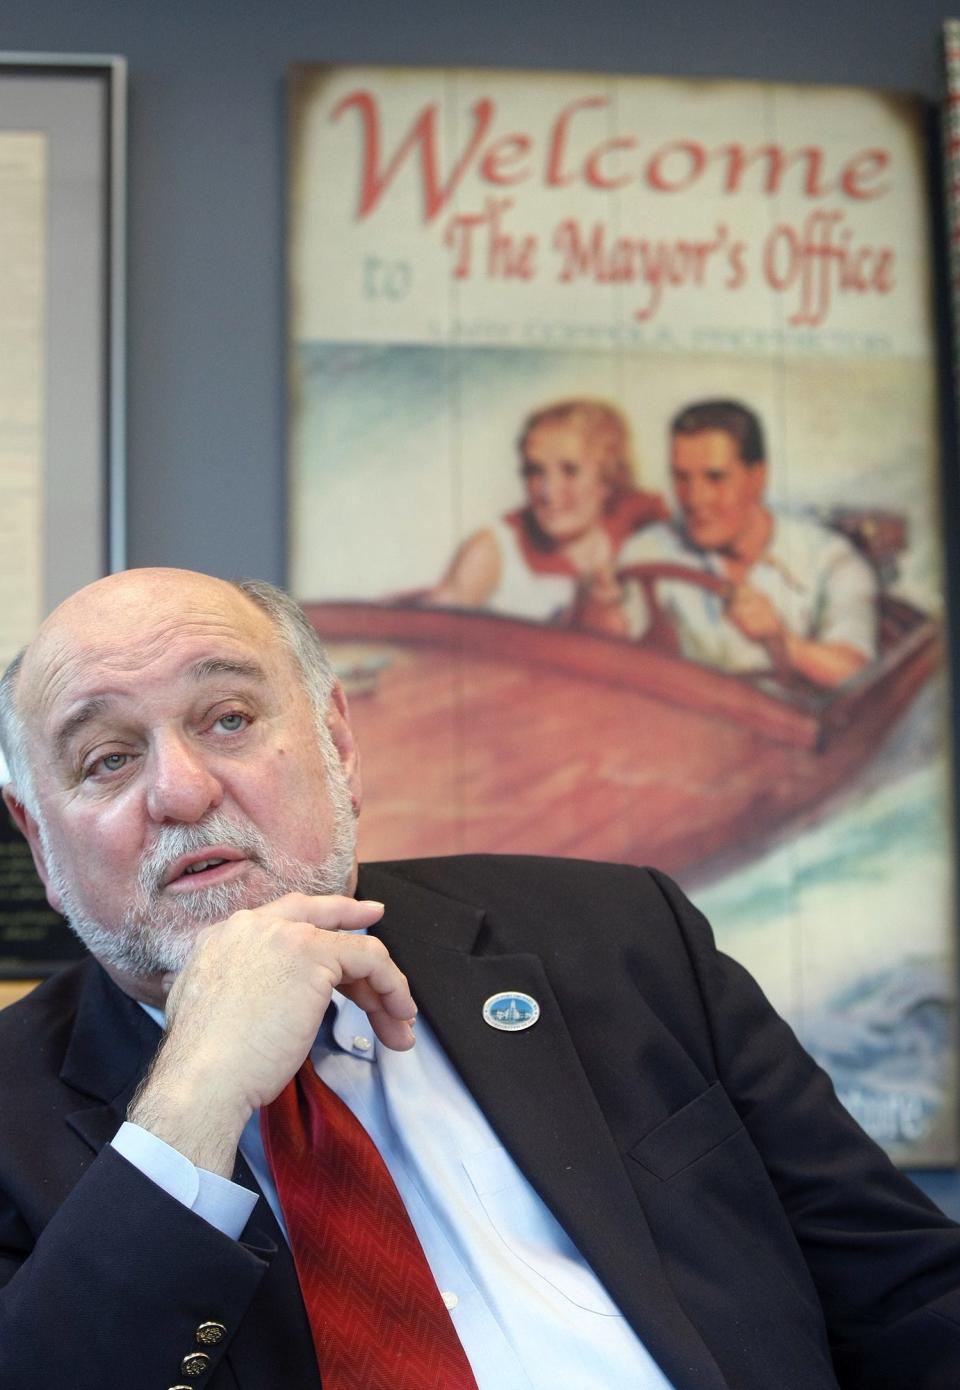 Former Port Orchard Mayor Lary Coppola reflects on his tenure leading the city from his City Hall office in 2011.